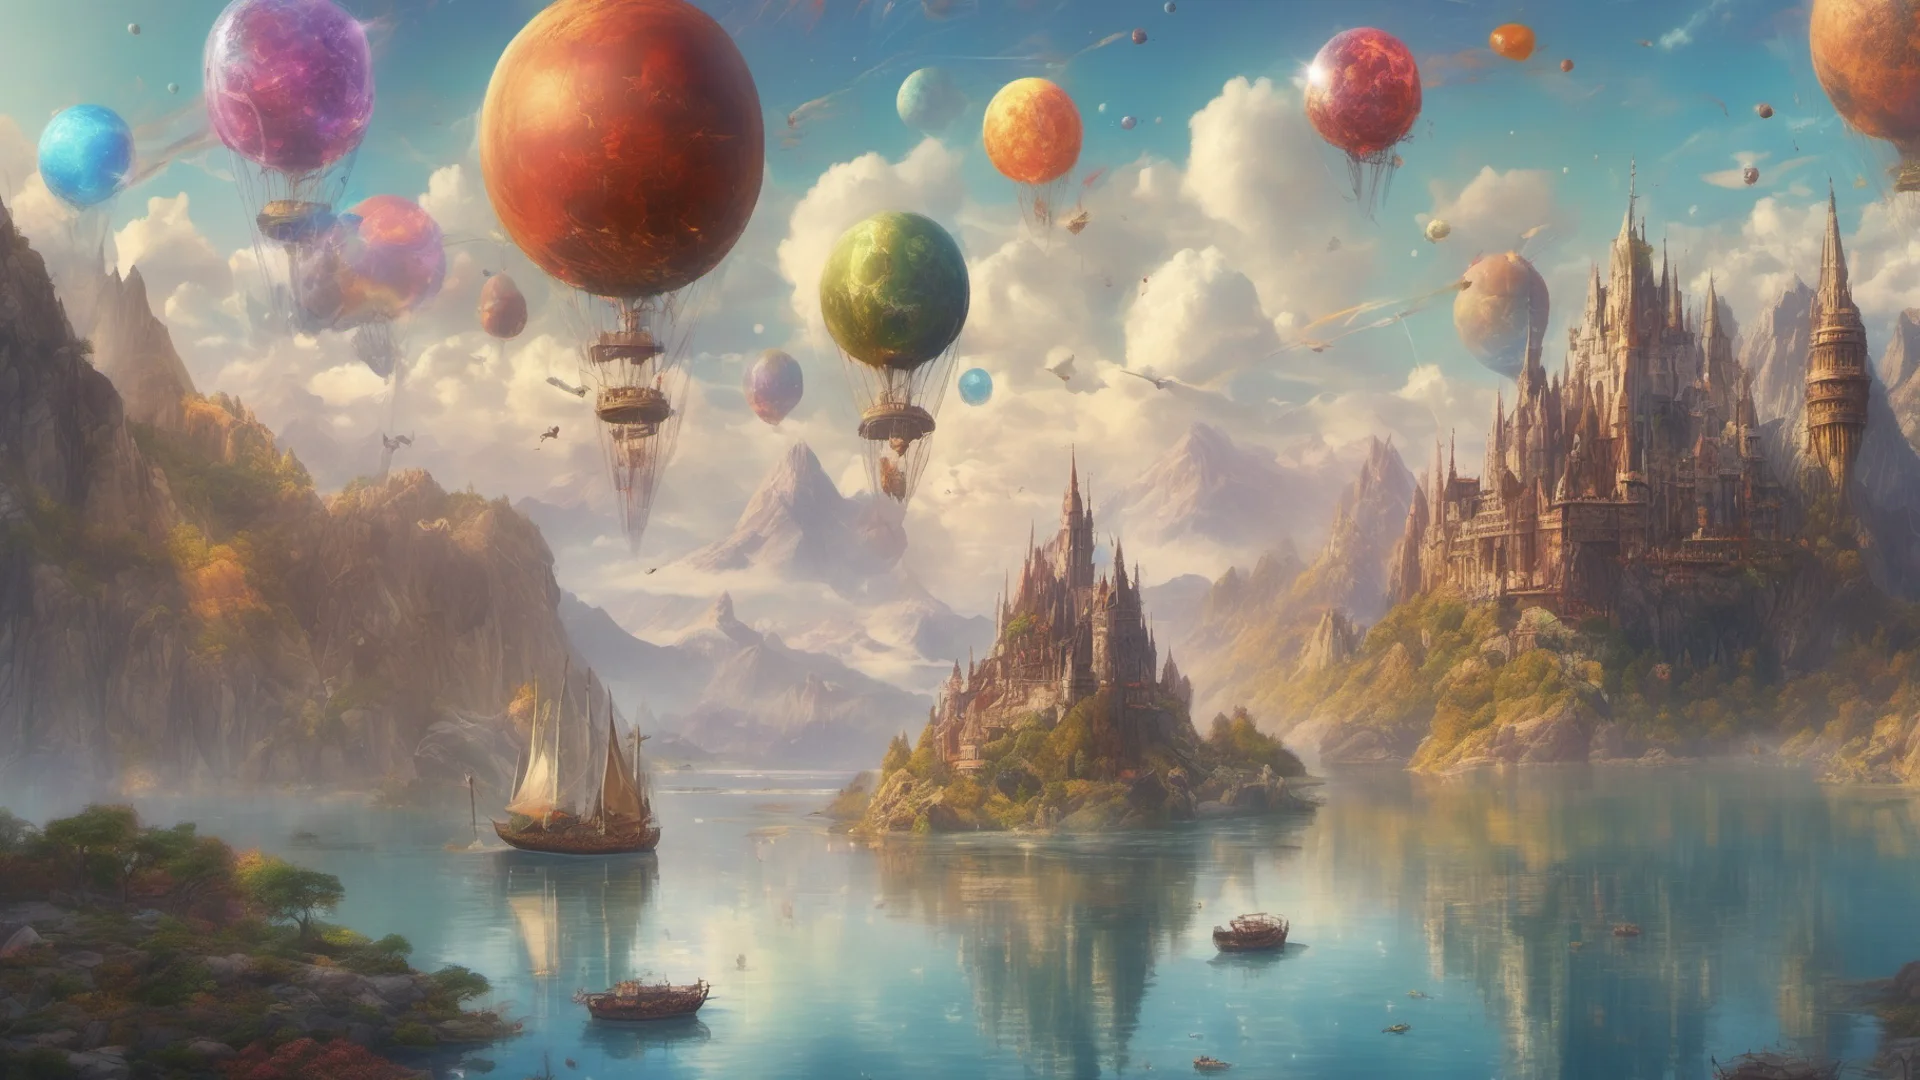 aiepic fantasy environment castle on tall mountain lakes sky with many colorful planets boats sailing airships and blimps floating   confident engaging wow artstation art 3 wide